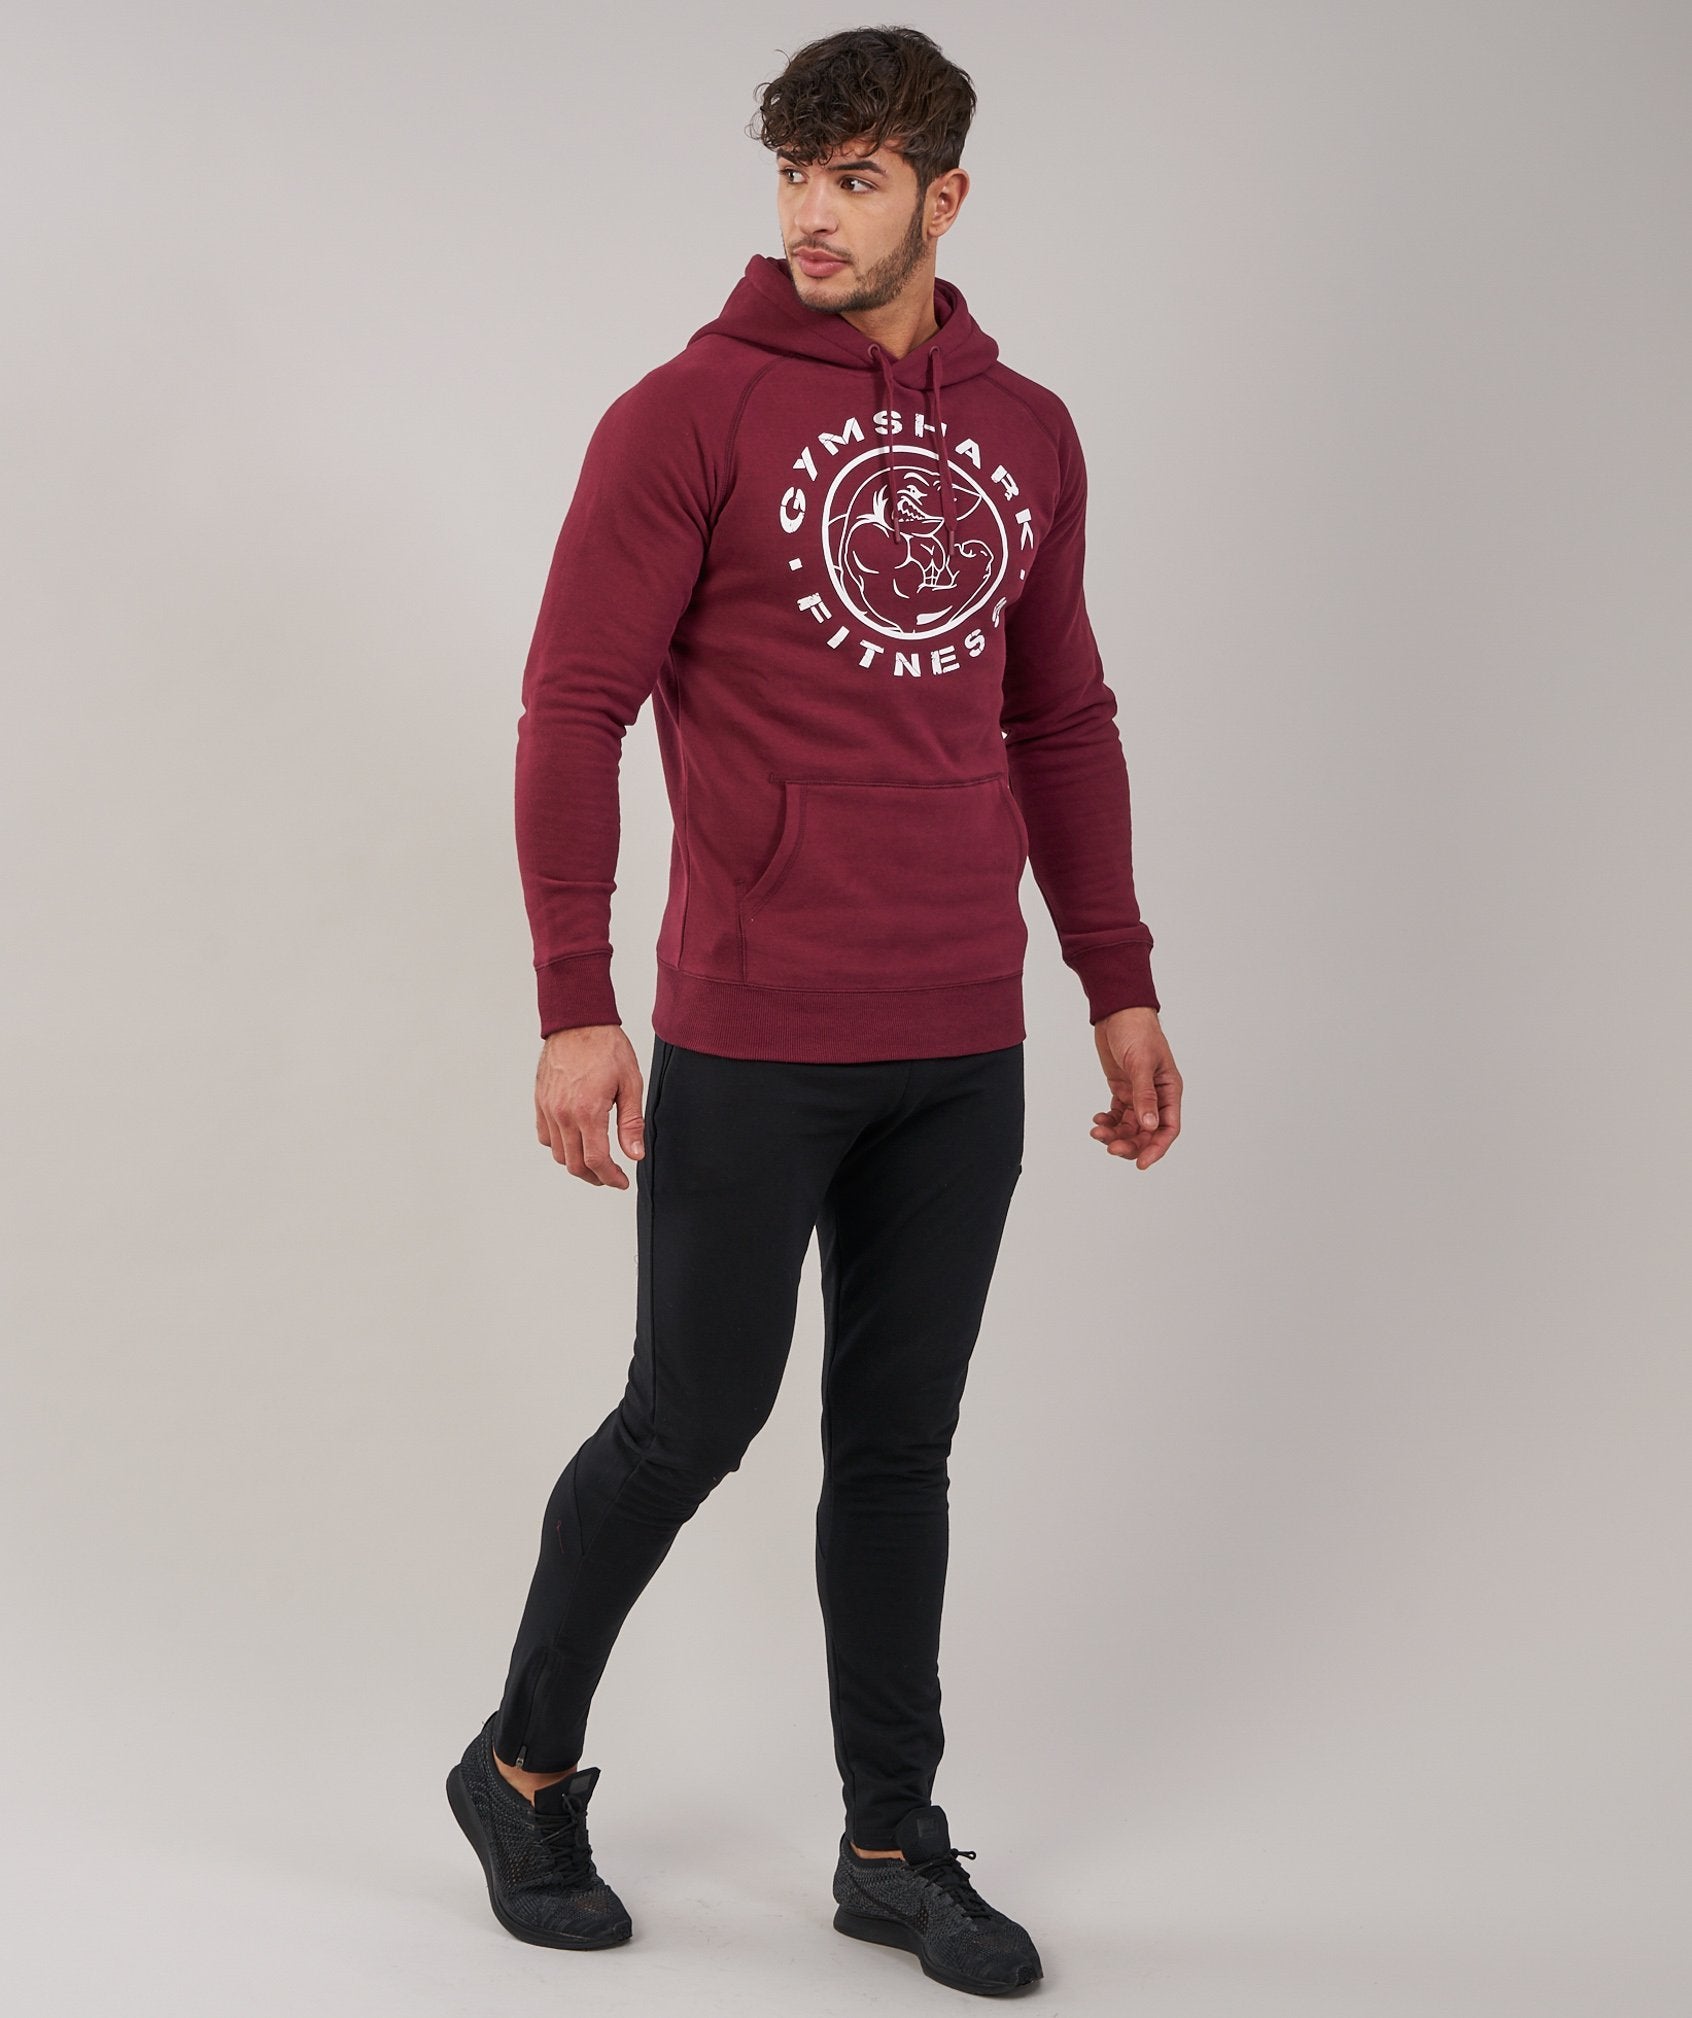 Fitness Hoodie in Port - view 3